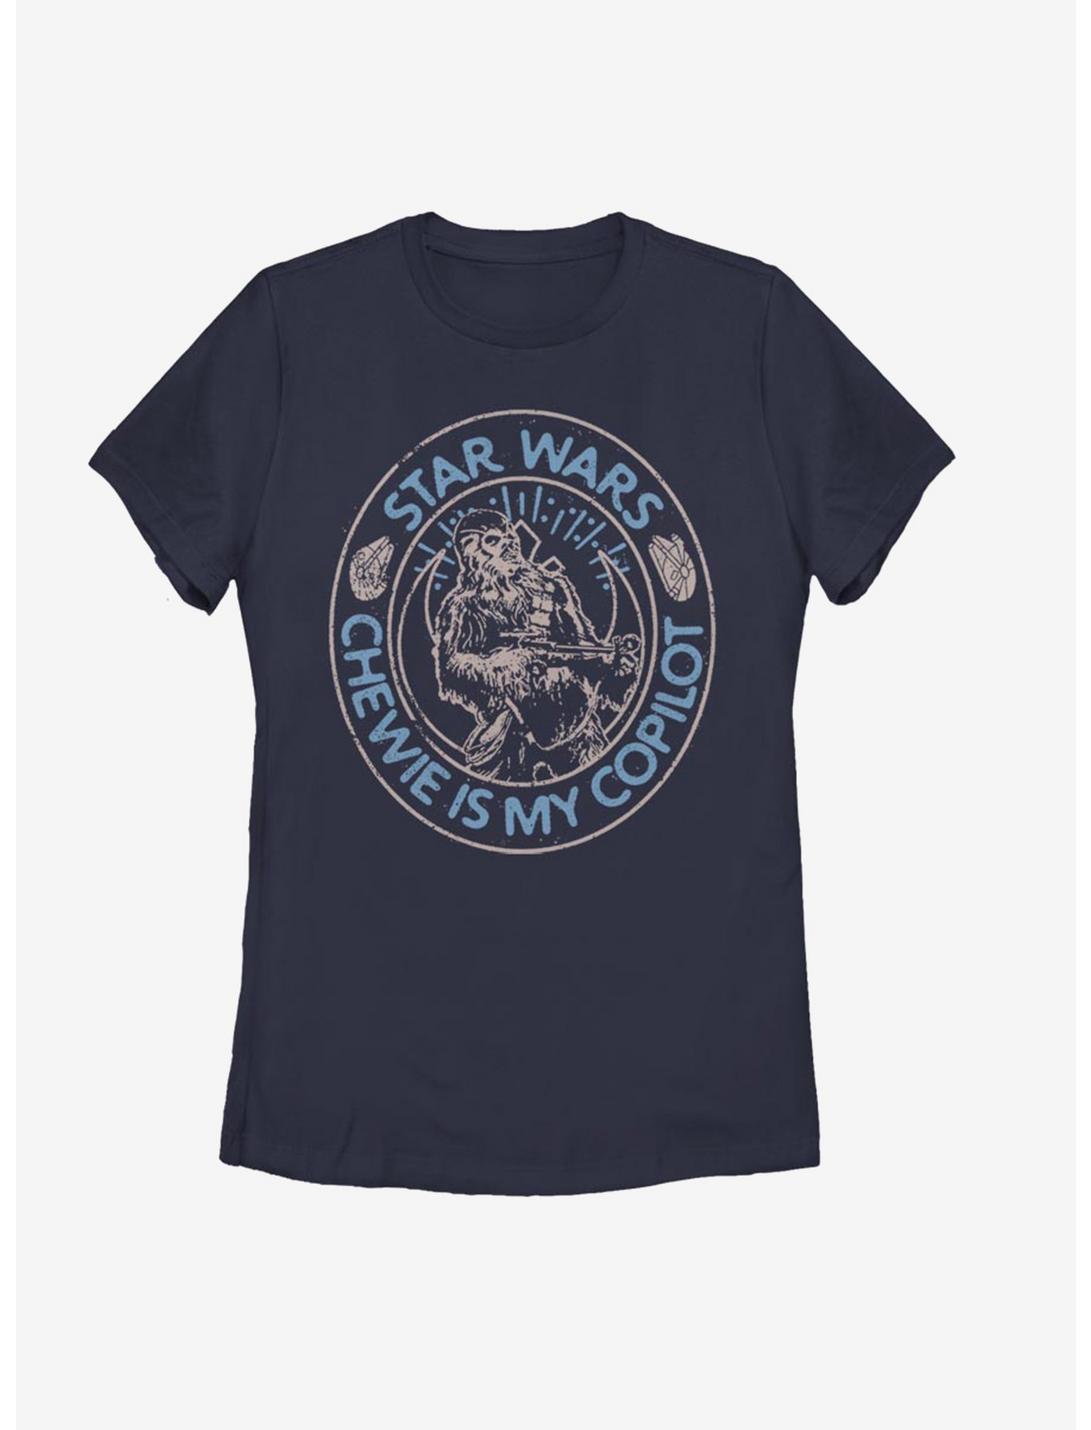 Star Wars Episode IX The Rise Of Skywalker Way of the Wookiee Womens T-Shirt, NAVY, hi-res